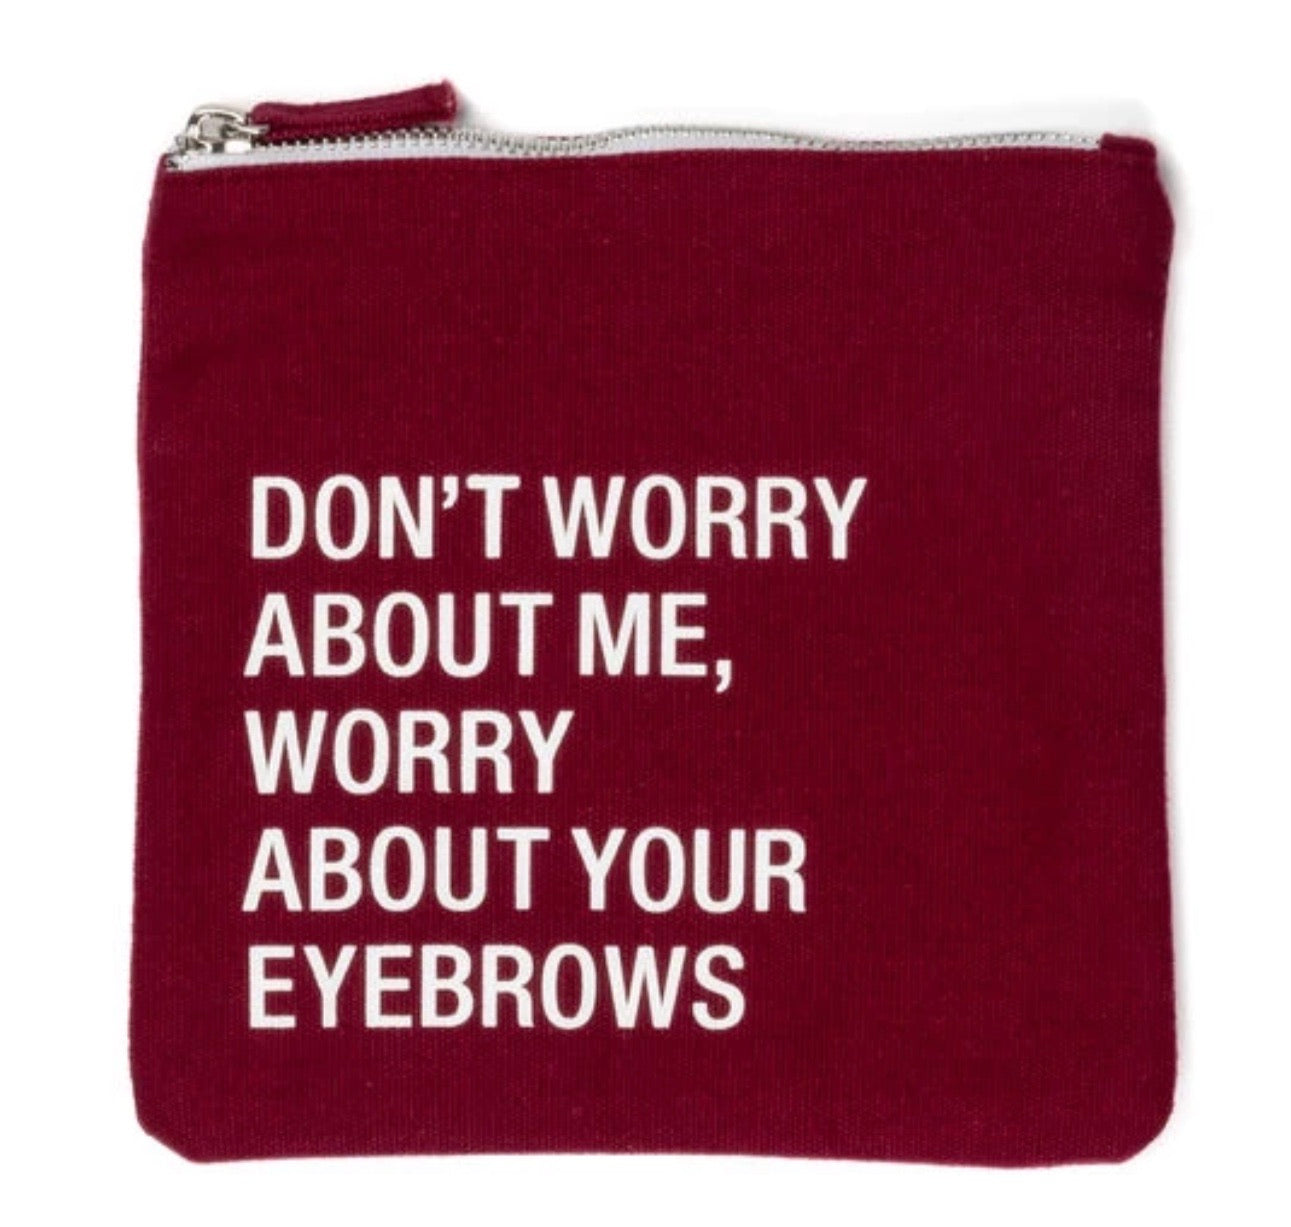 DON’T WORRY COSMETICS BAG